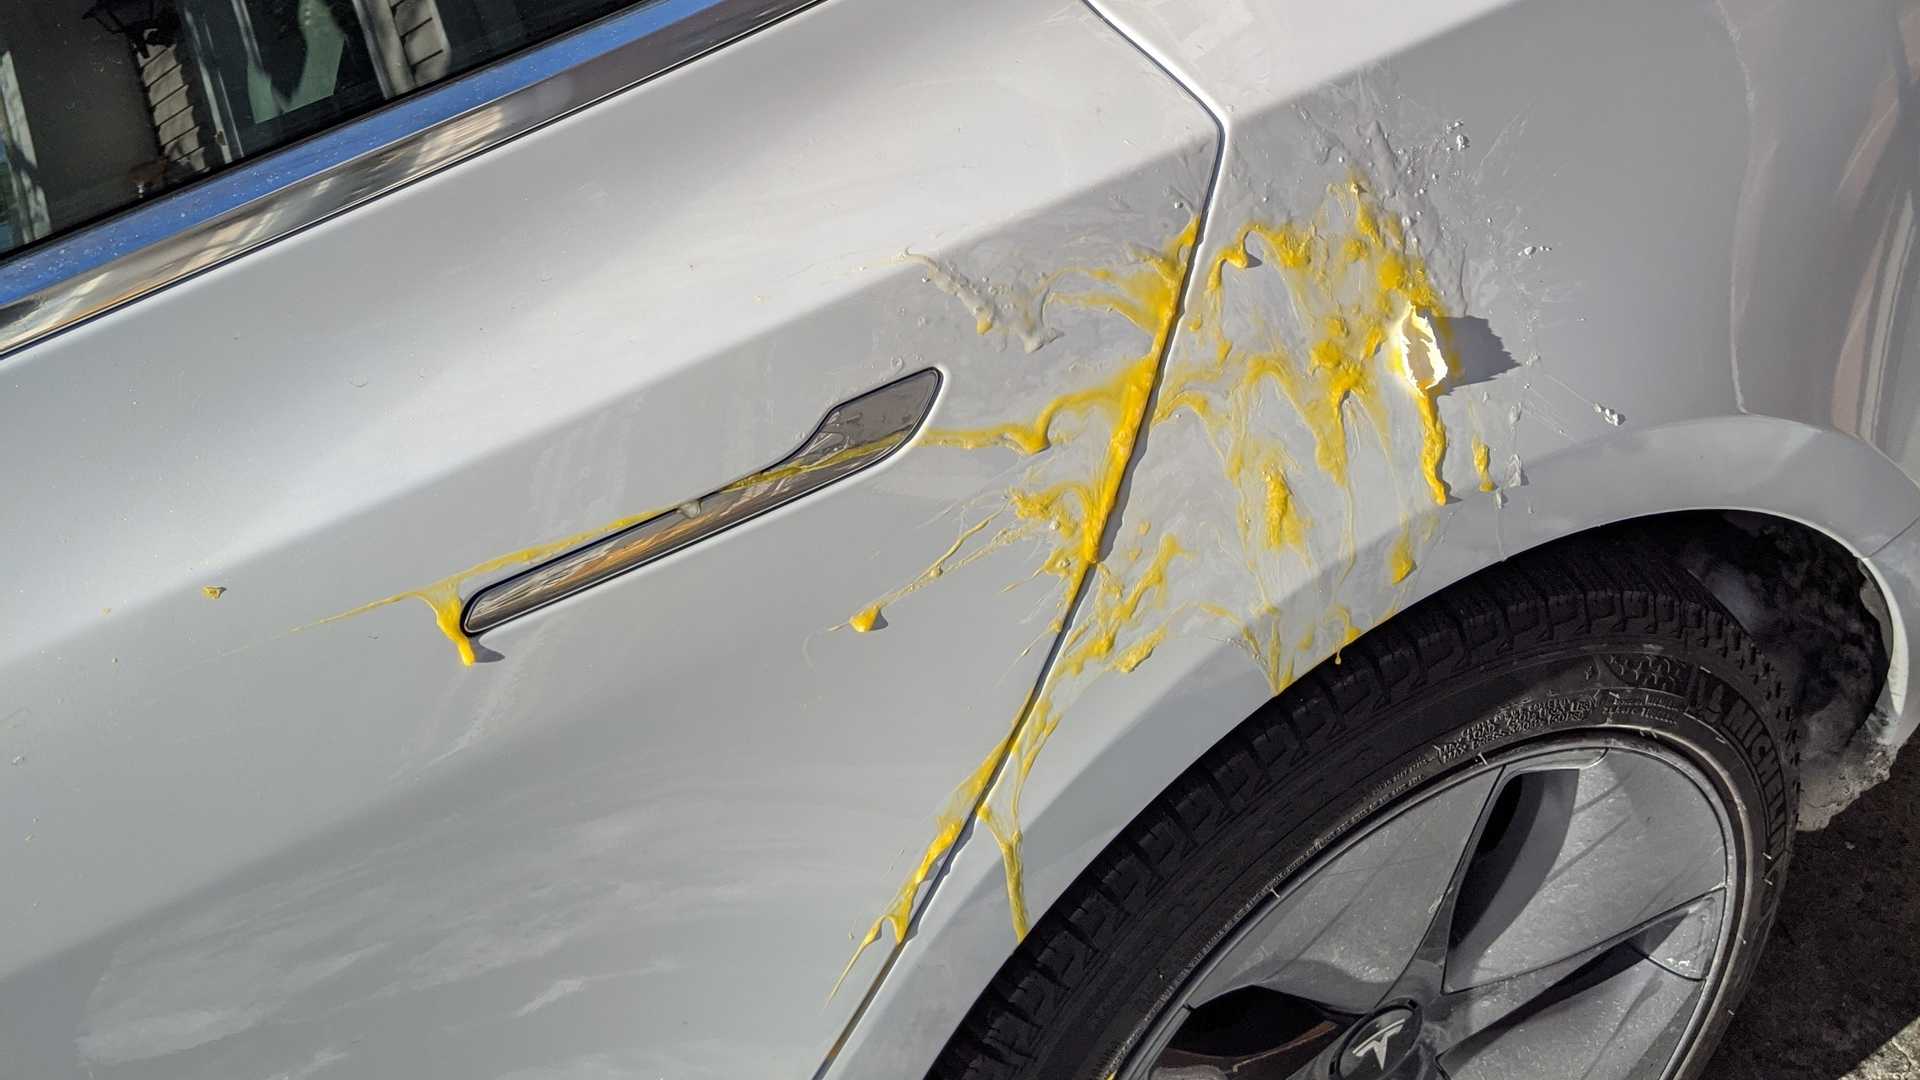 this is a photo of a tesla being egged